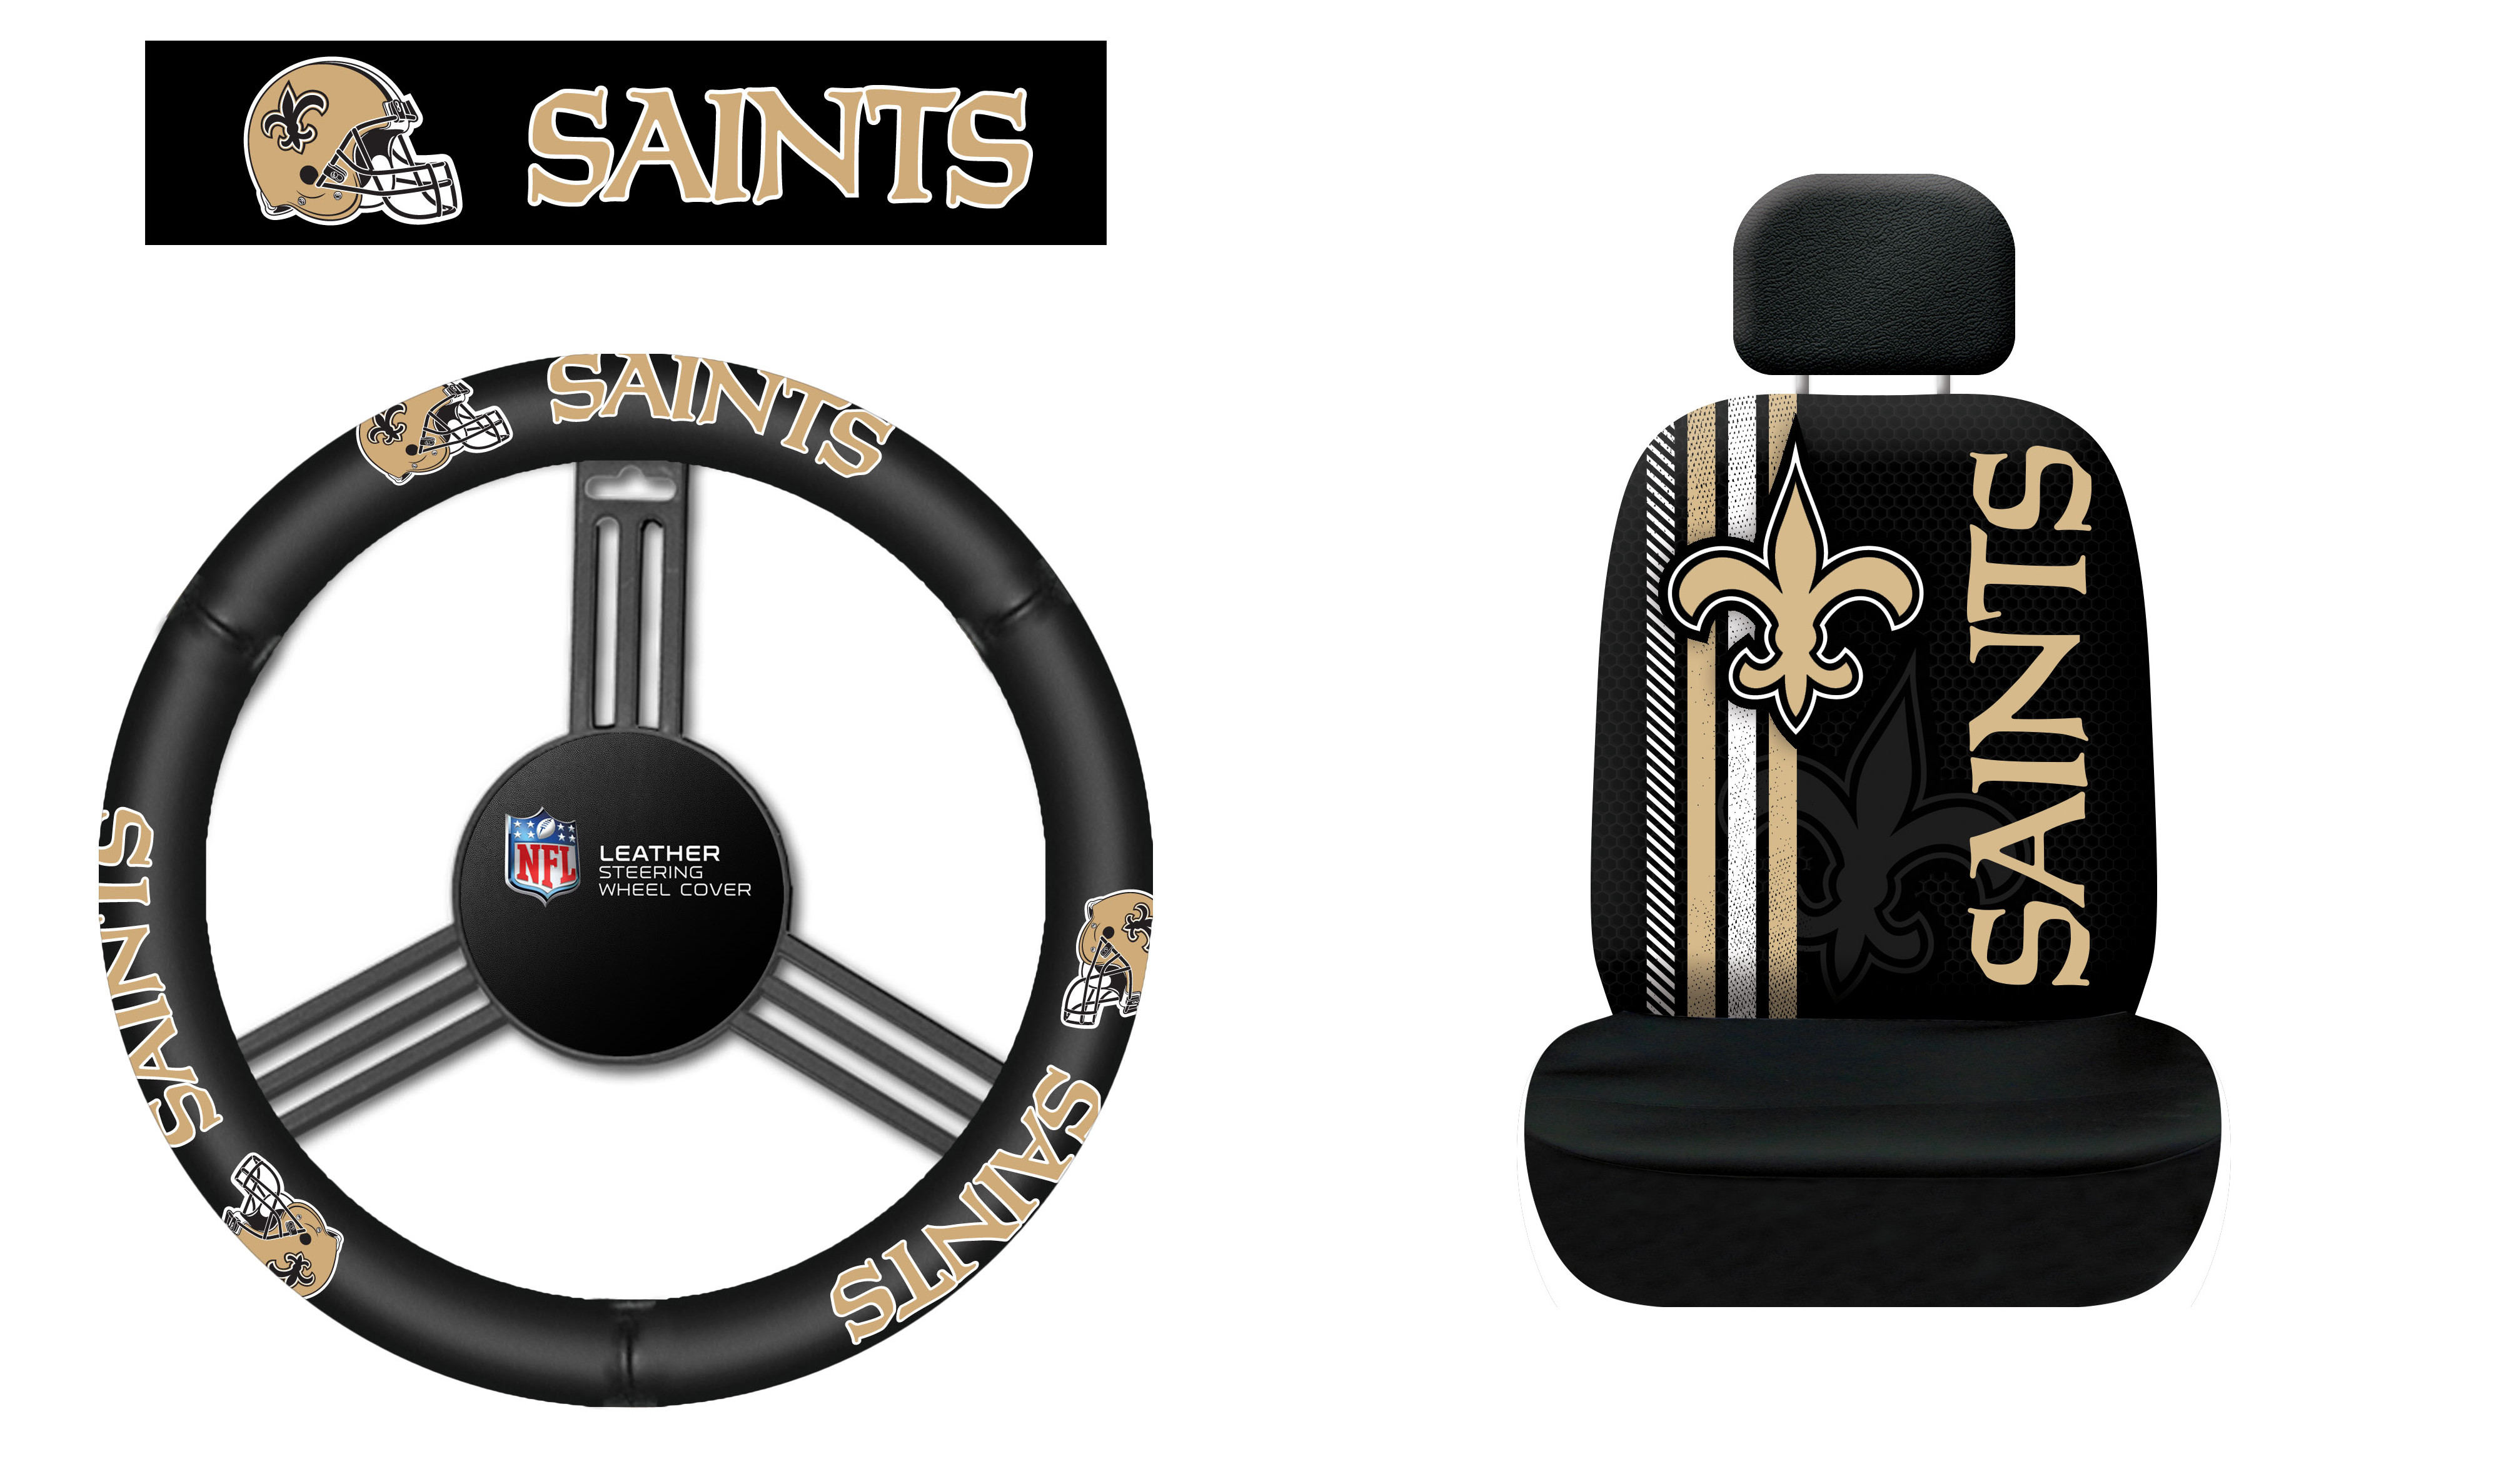 NFL New Orleans Saints Rally Seat Cover with Leather Steering Wheel Cover - image 1 of 1